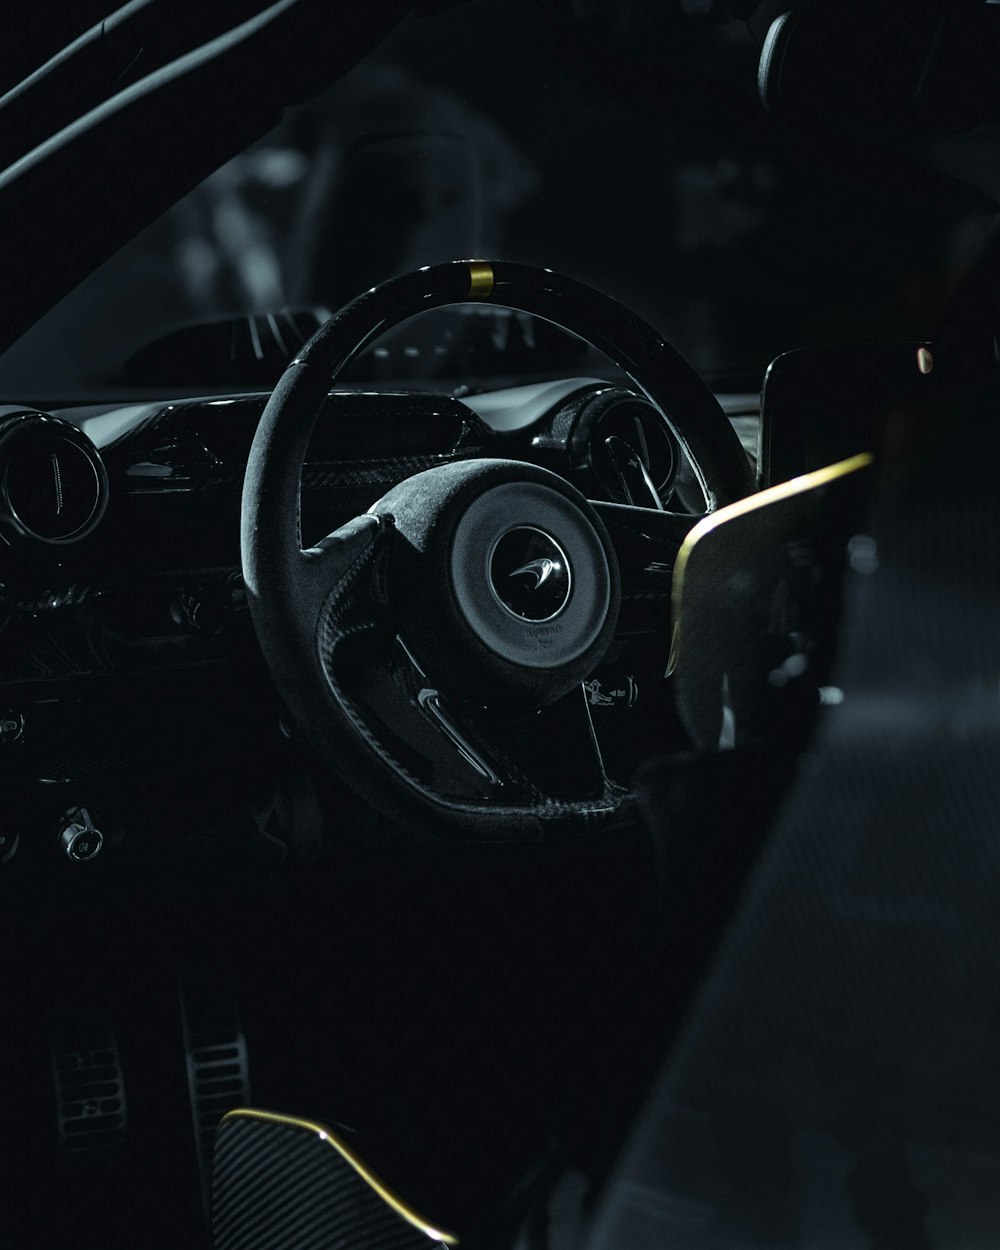 close-up photography of black vehicle steering wheel during nighttime